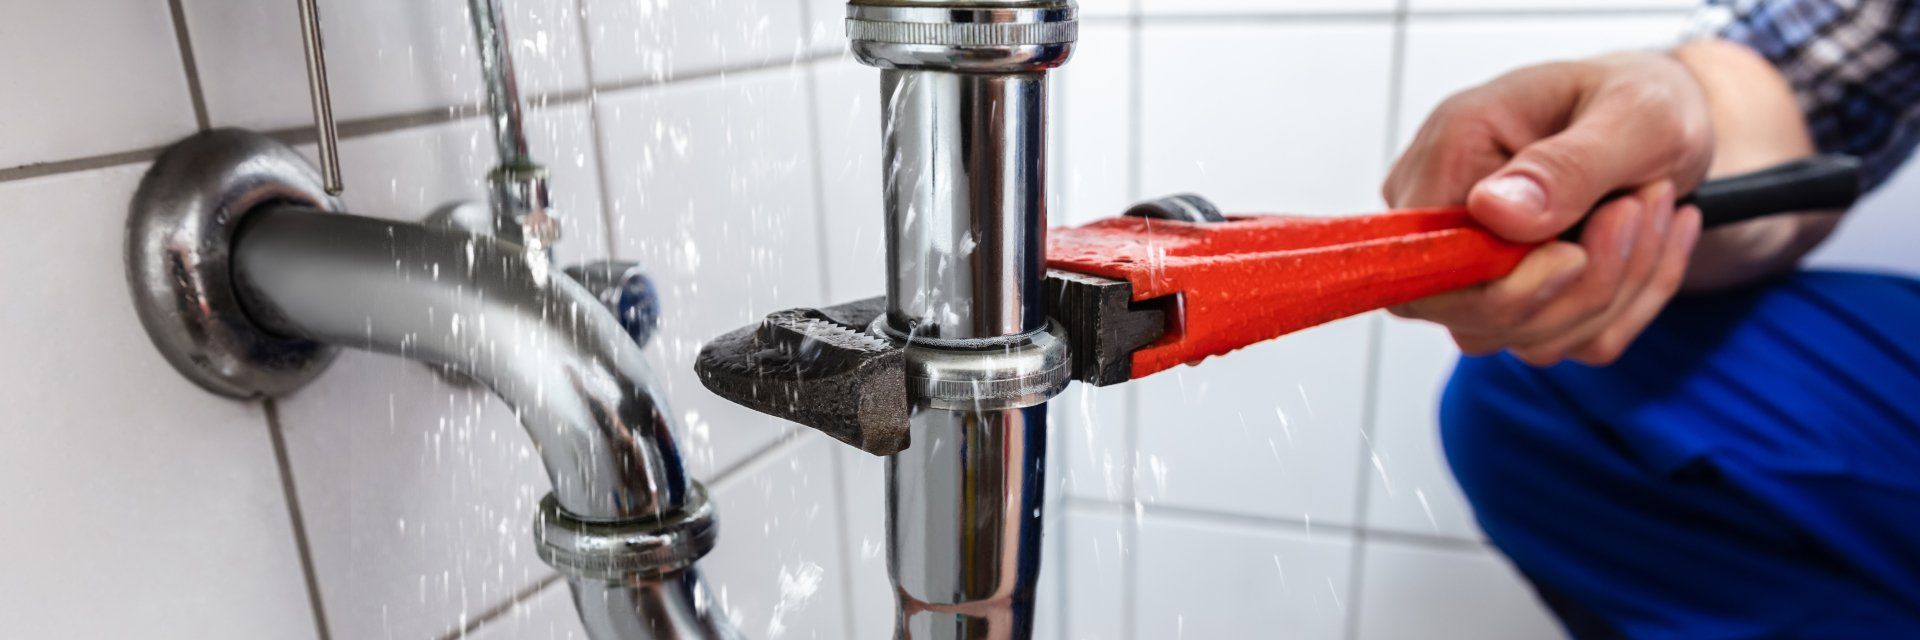 Plumbing Services in Smyrna, TX